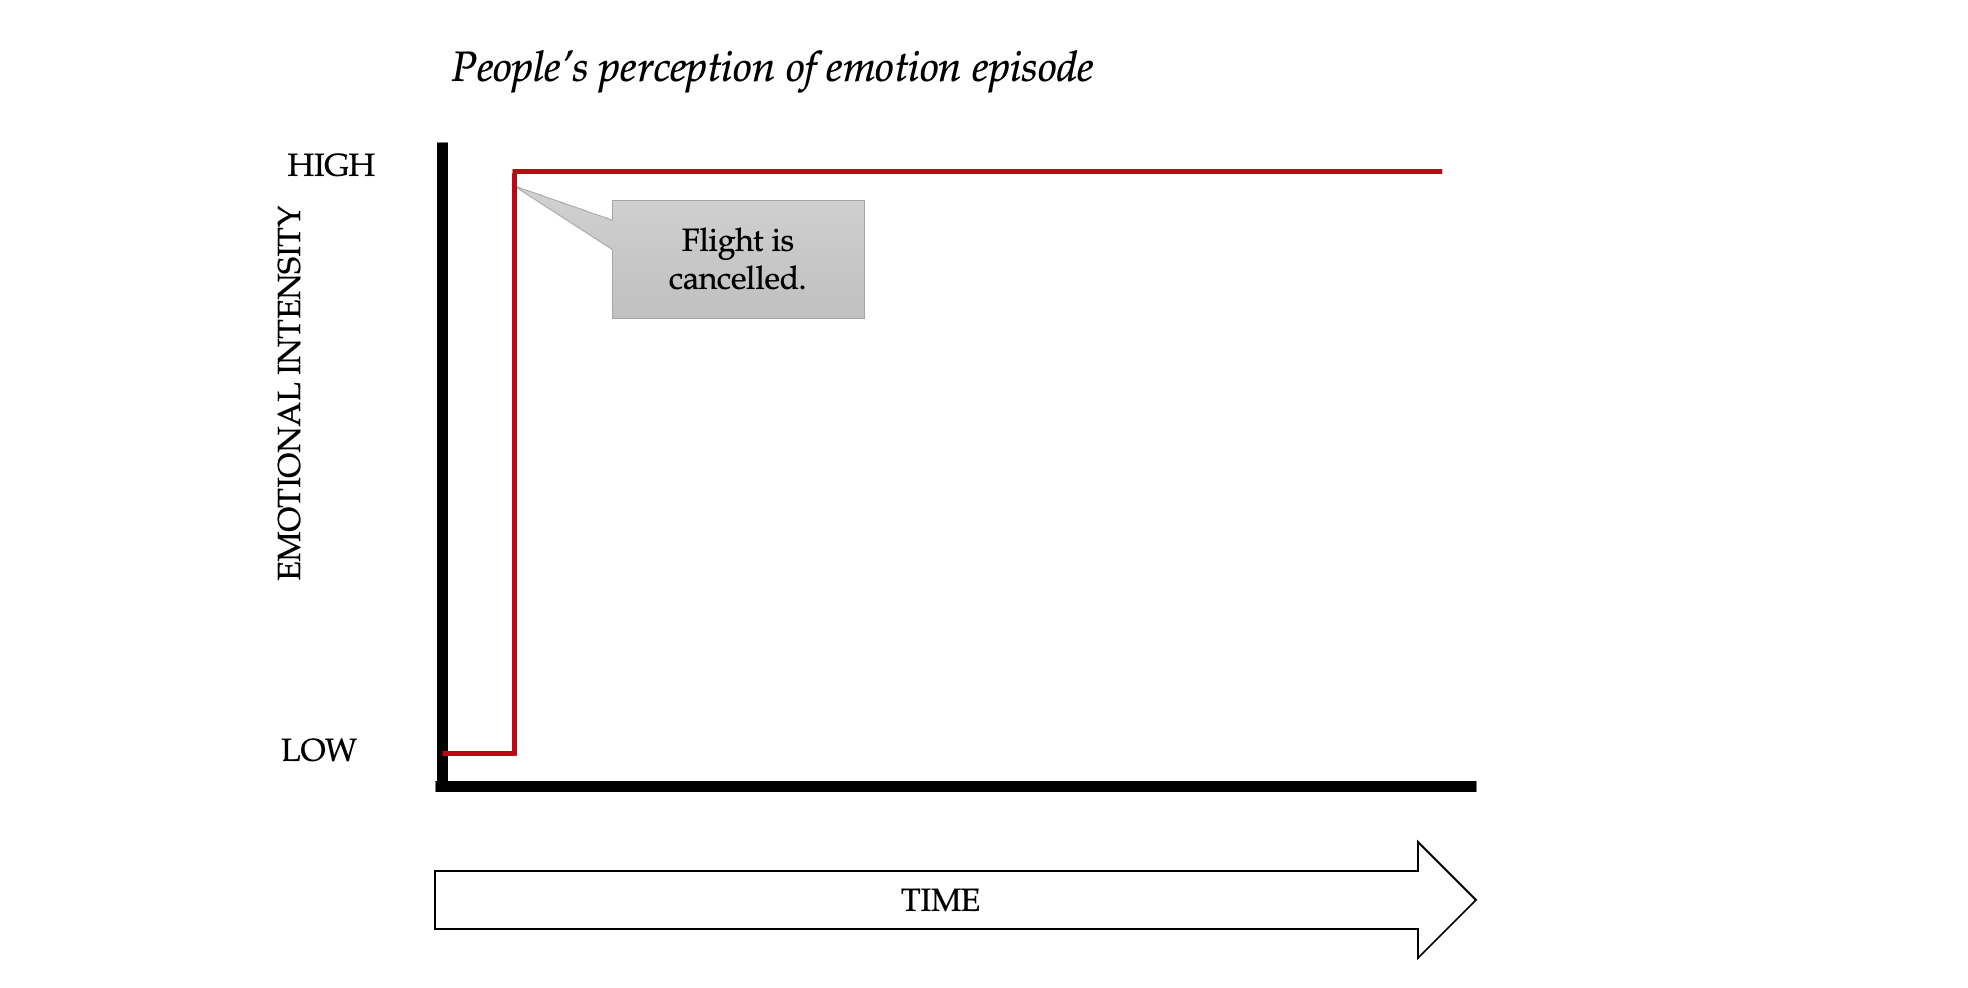 A diagram illustrating people's perception of an emotion episode. The y-axis is labeled emotional intensity with high at the top and low at the bottom. The x-axis is labeled time and shows an arrow pointing right. There is a red line that starts at low, and goes directly to high after a little time, a graphic is shown at the initial high point saying "flight is cancelled." The emotional intensity line stays stable at high through the graph.